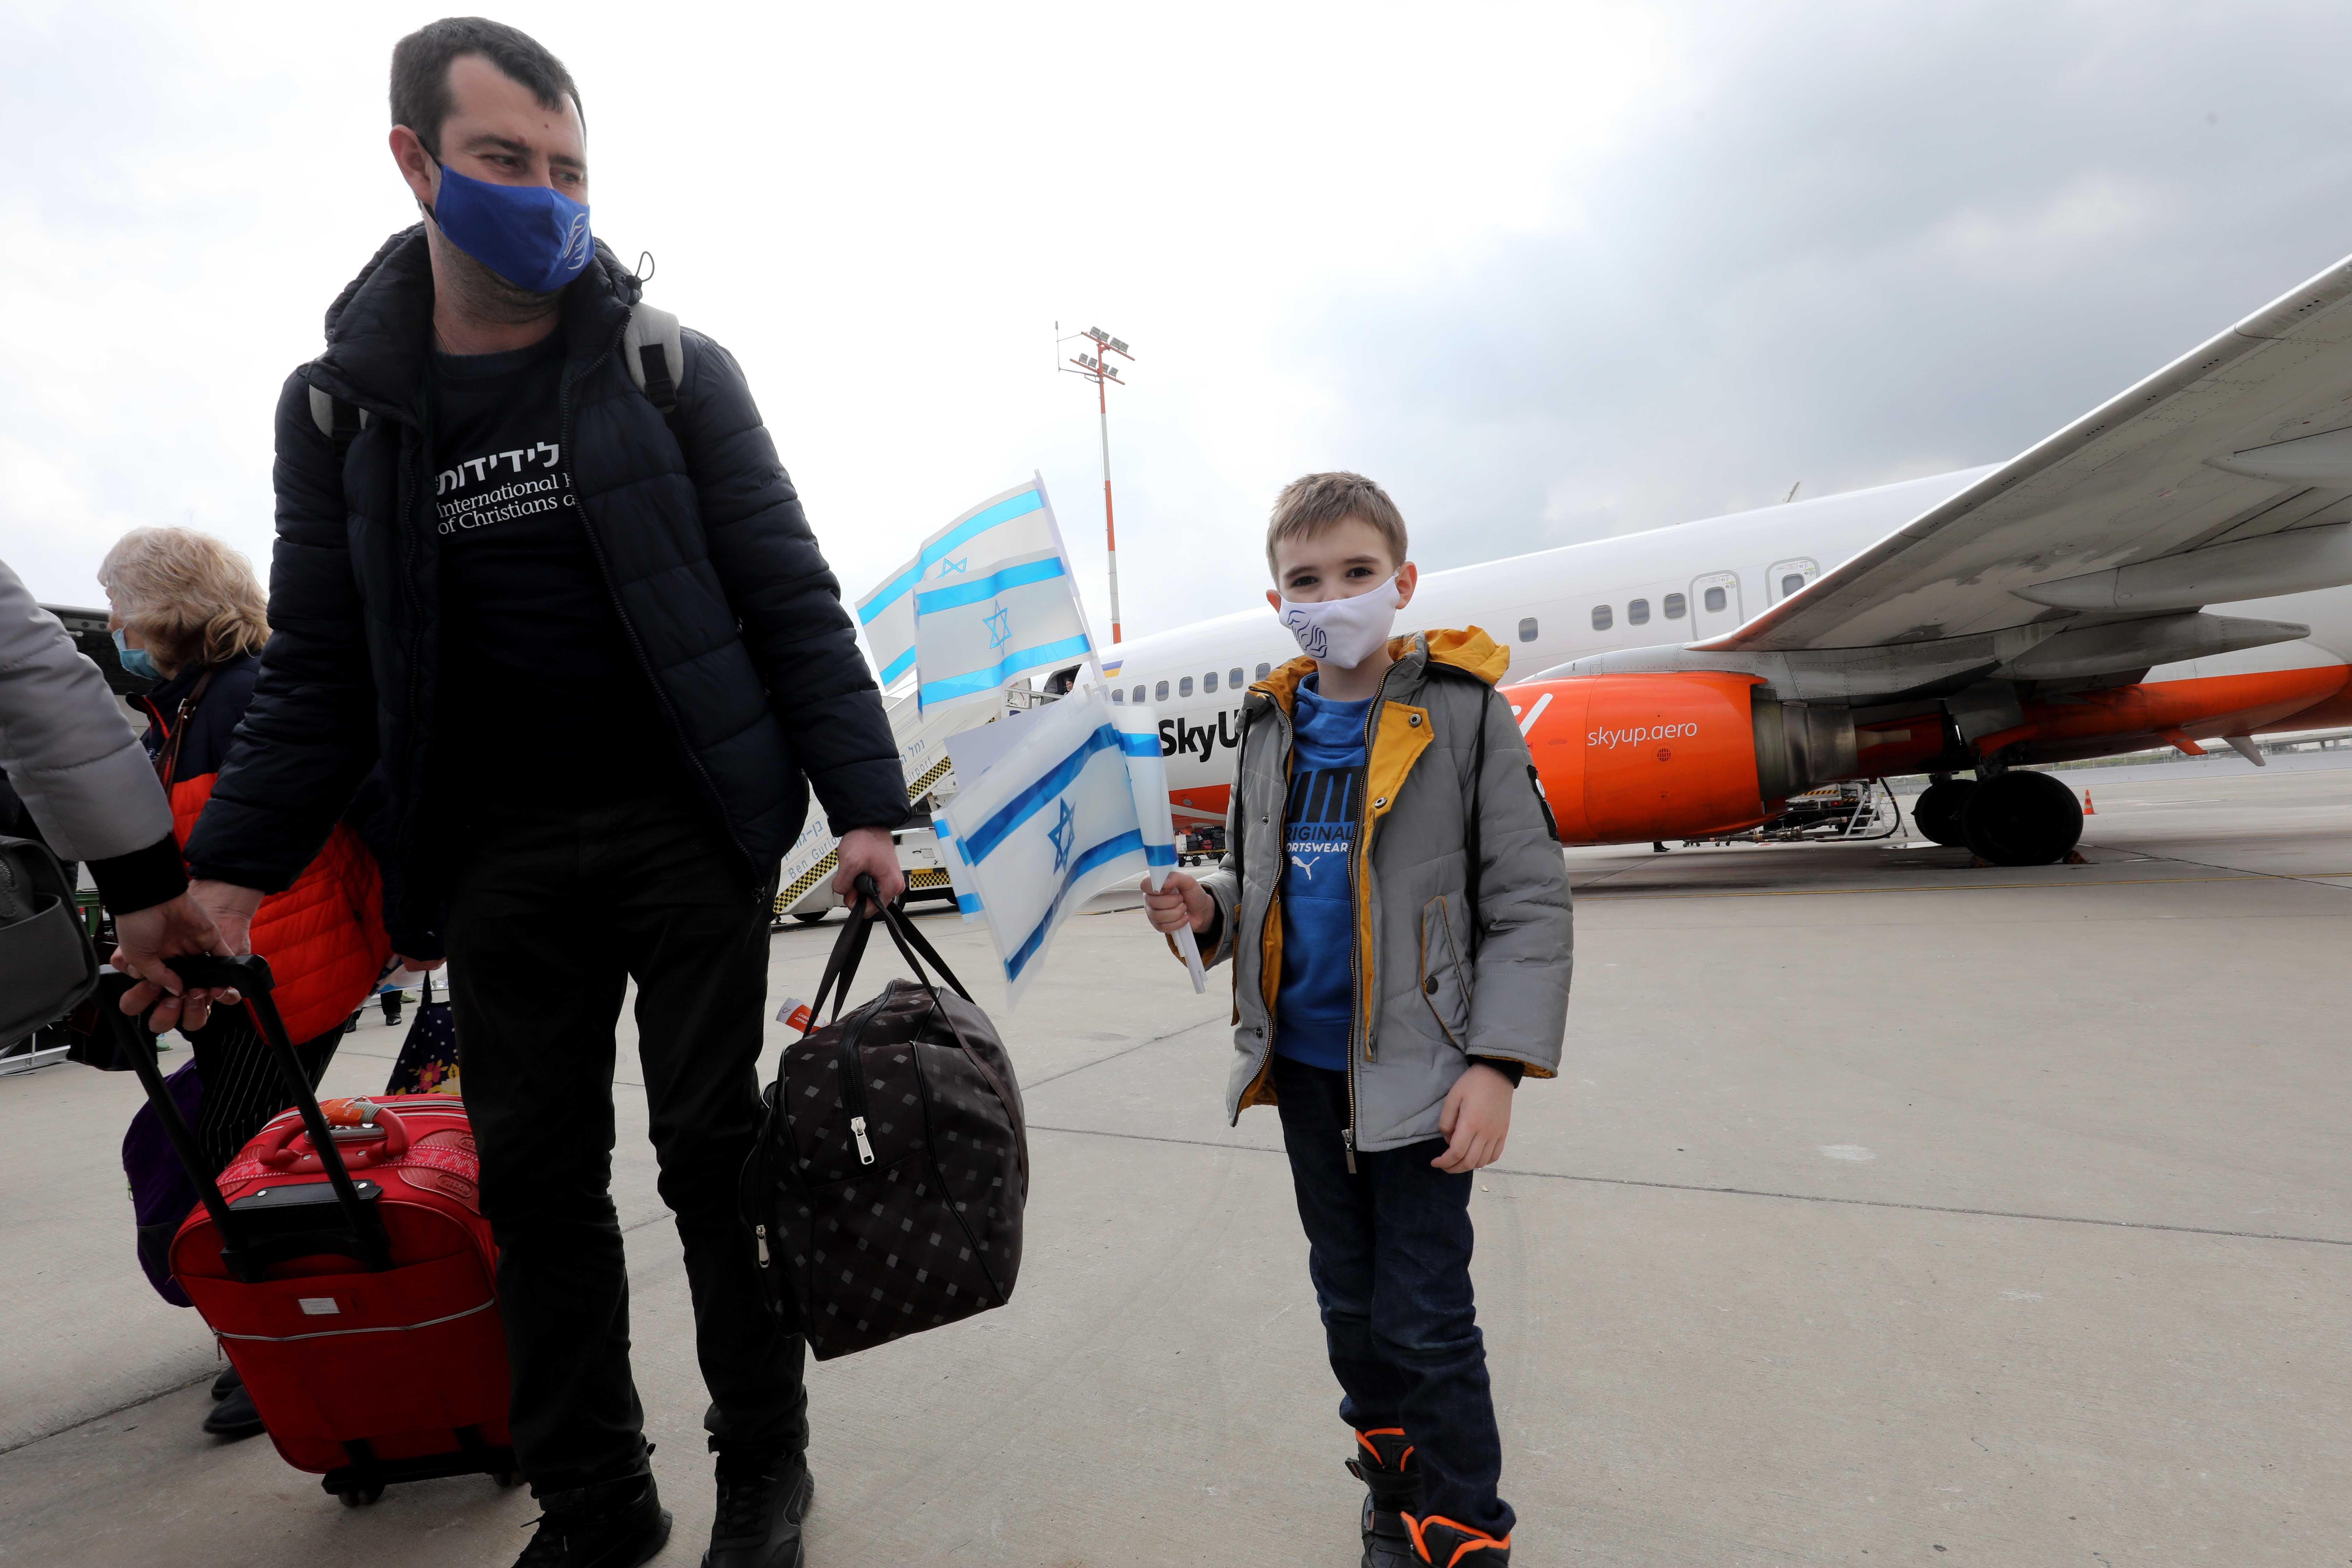 Ukrainian immigrants arrive at Tel Aviv Inter' Airport on February 20, 2022. Dozens of new immigrants from Ukraine arrived in Israel as tensions on the frontier between Ukraine and Russia.